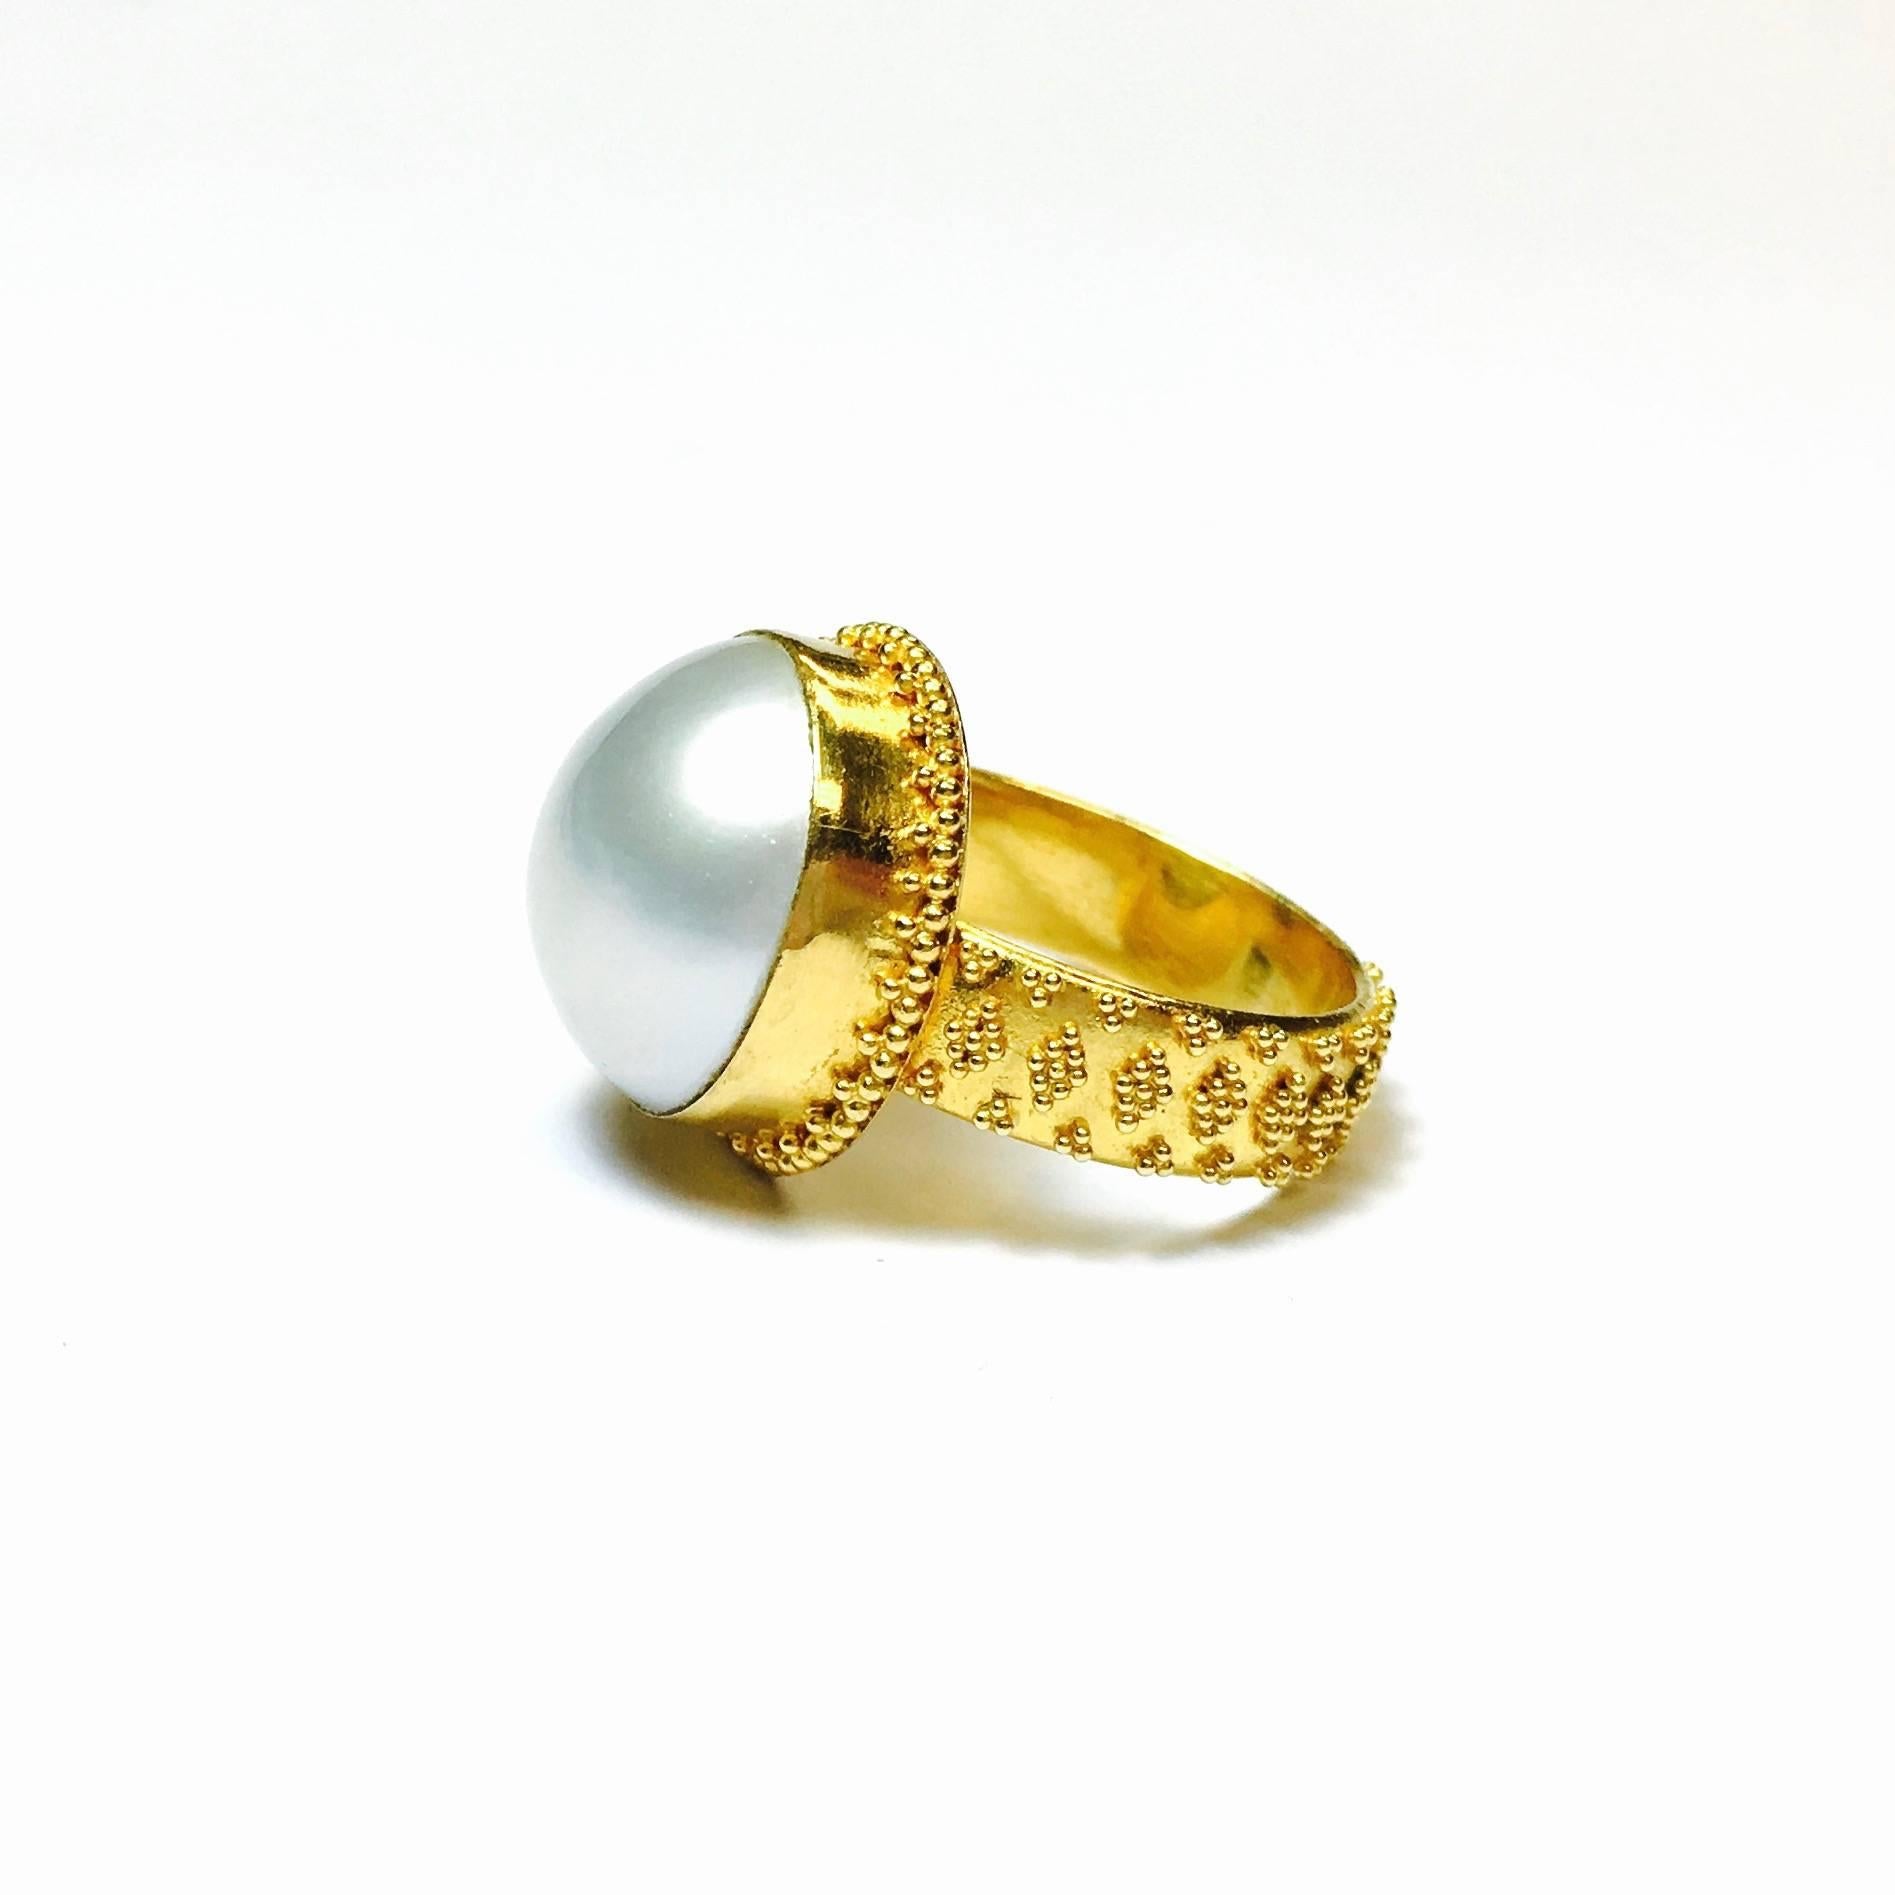 22K gold hand crafted beaded ring, featuring a 15mm round, white mabe pearl.
Size: 6.75
Weight: 8.7 grams